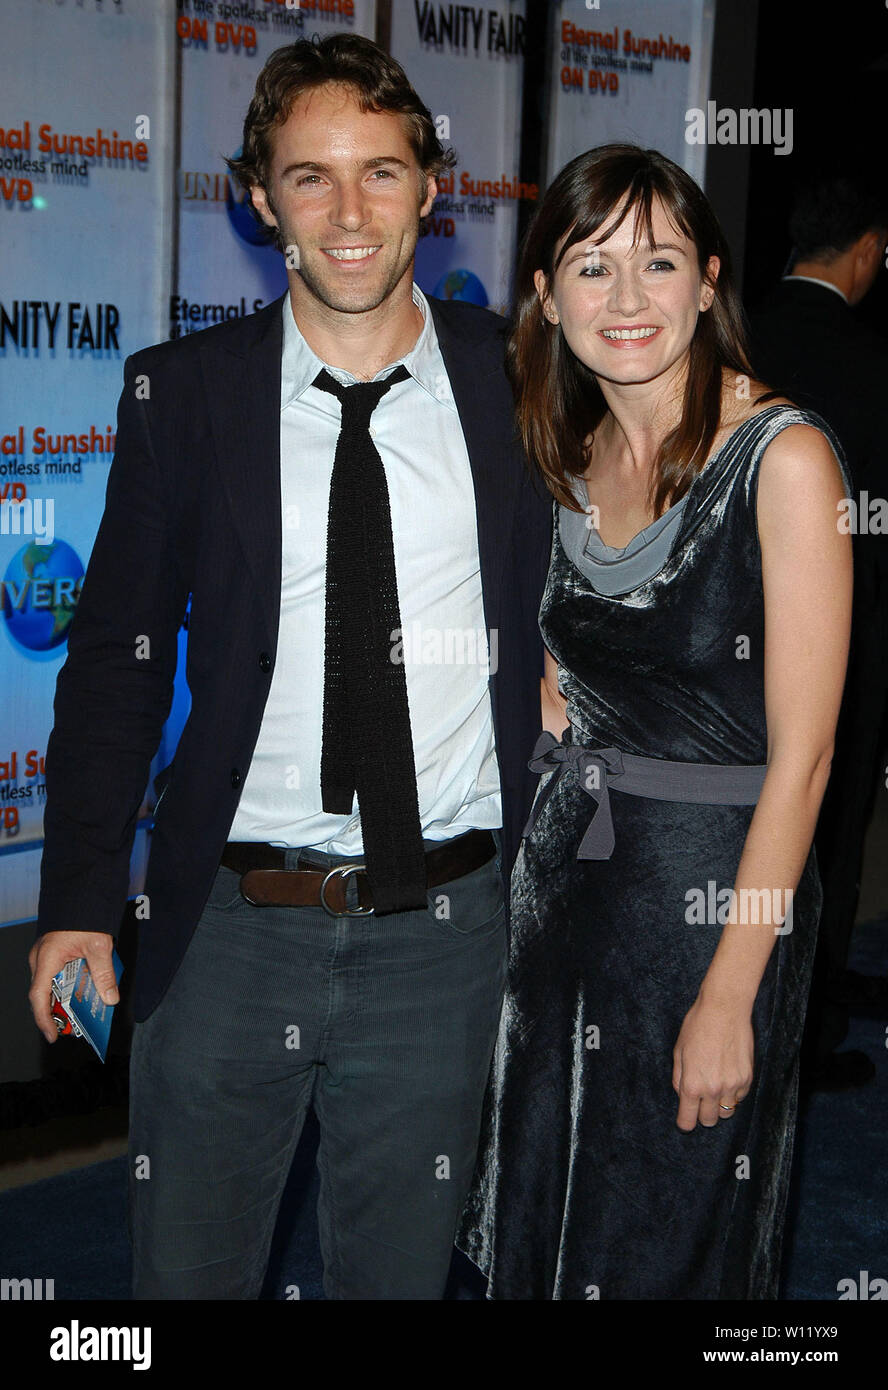 Alessandro Nivola and Emily Mortimer at the 'Enternal Sunshine of the Spotless Mind' DVD Launch Party held across the street from LACMA, 5900 Wilshire Blvd. building in Los Angeles, CA. The event took place on Thursday, September 23, 2004.  Photo by: SBM / PictureLux - All Rights Reserved   - File Reference # 33790-6684SBMPLX Stock Photo